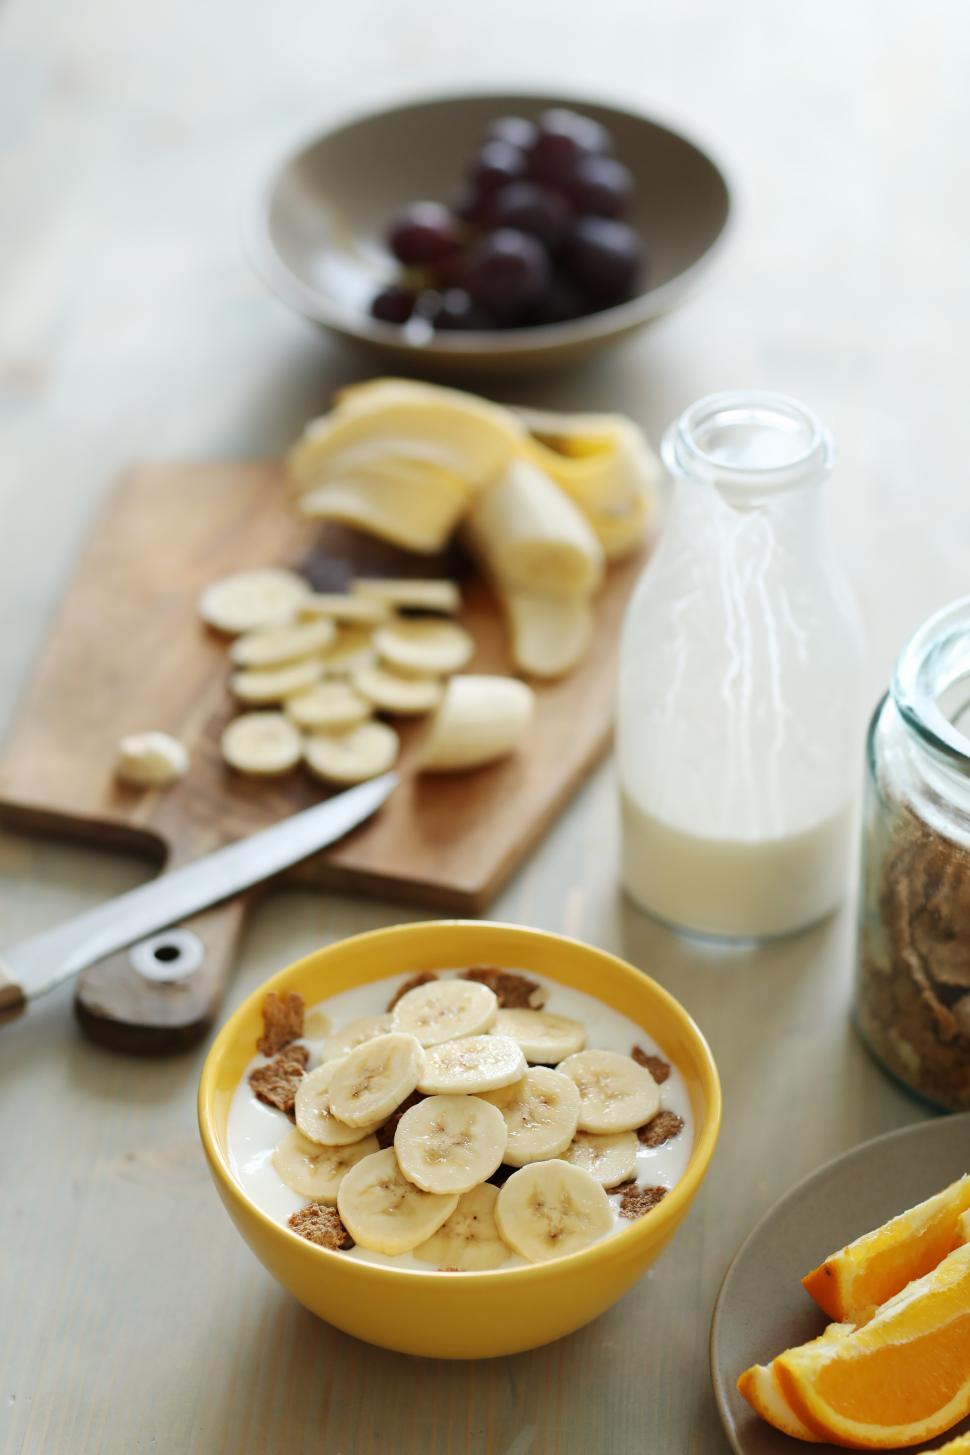 Free Image of Breakfast - Bananas over milk and cereal 